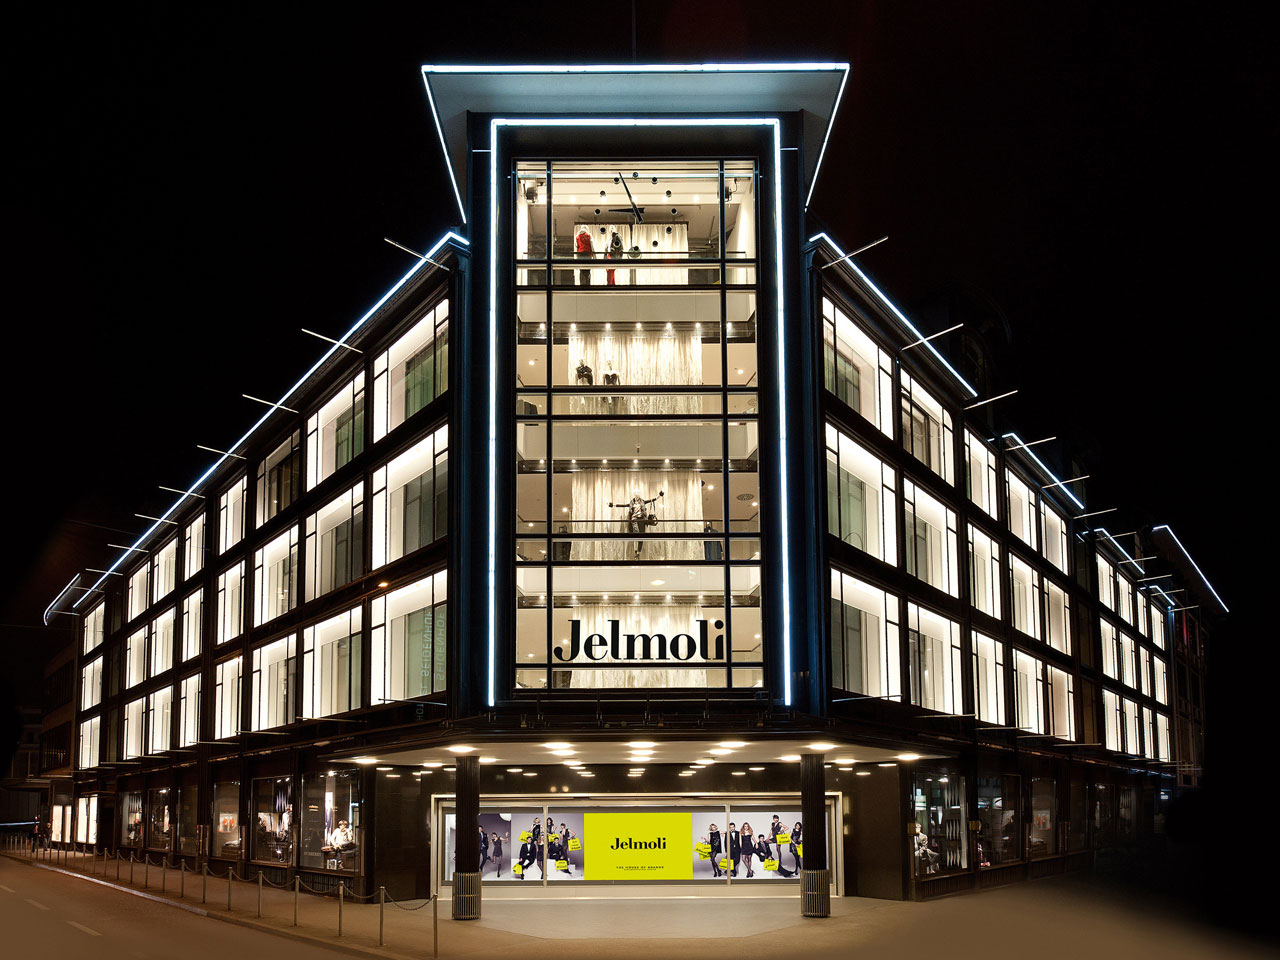 The iXOOST hi-fi systems enter the oldest department store in Europe